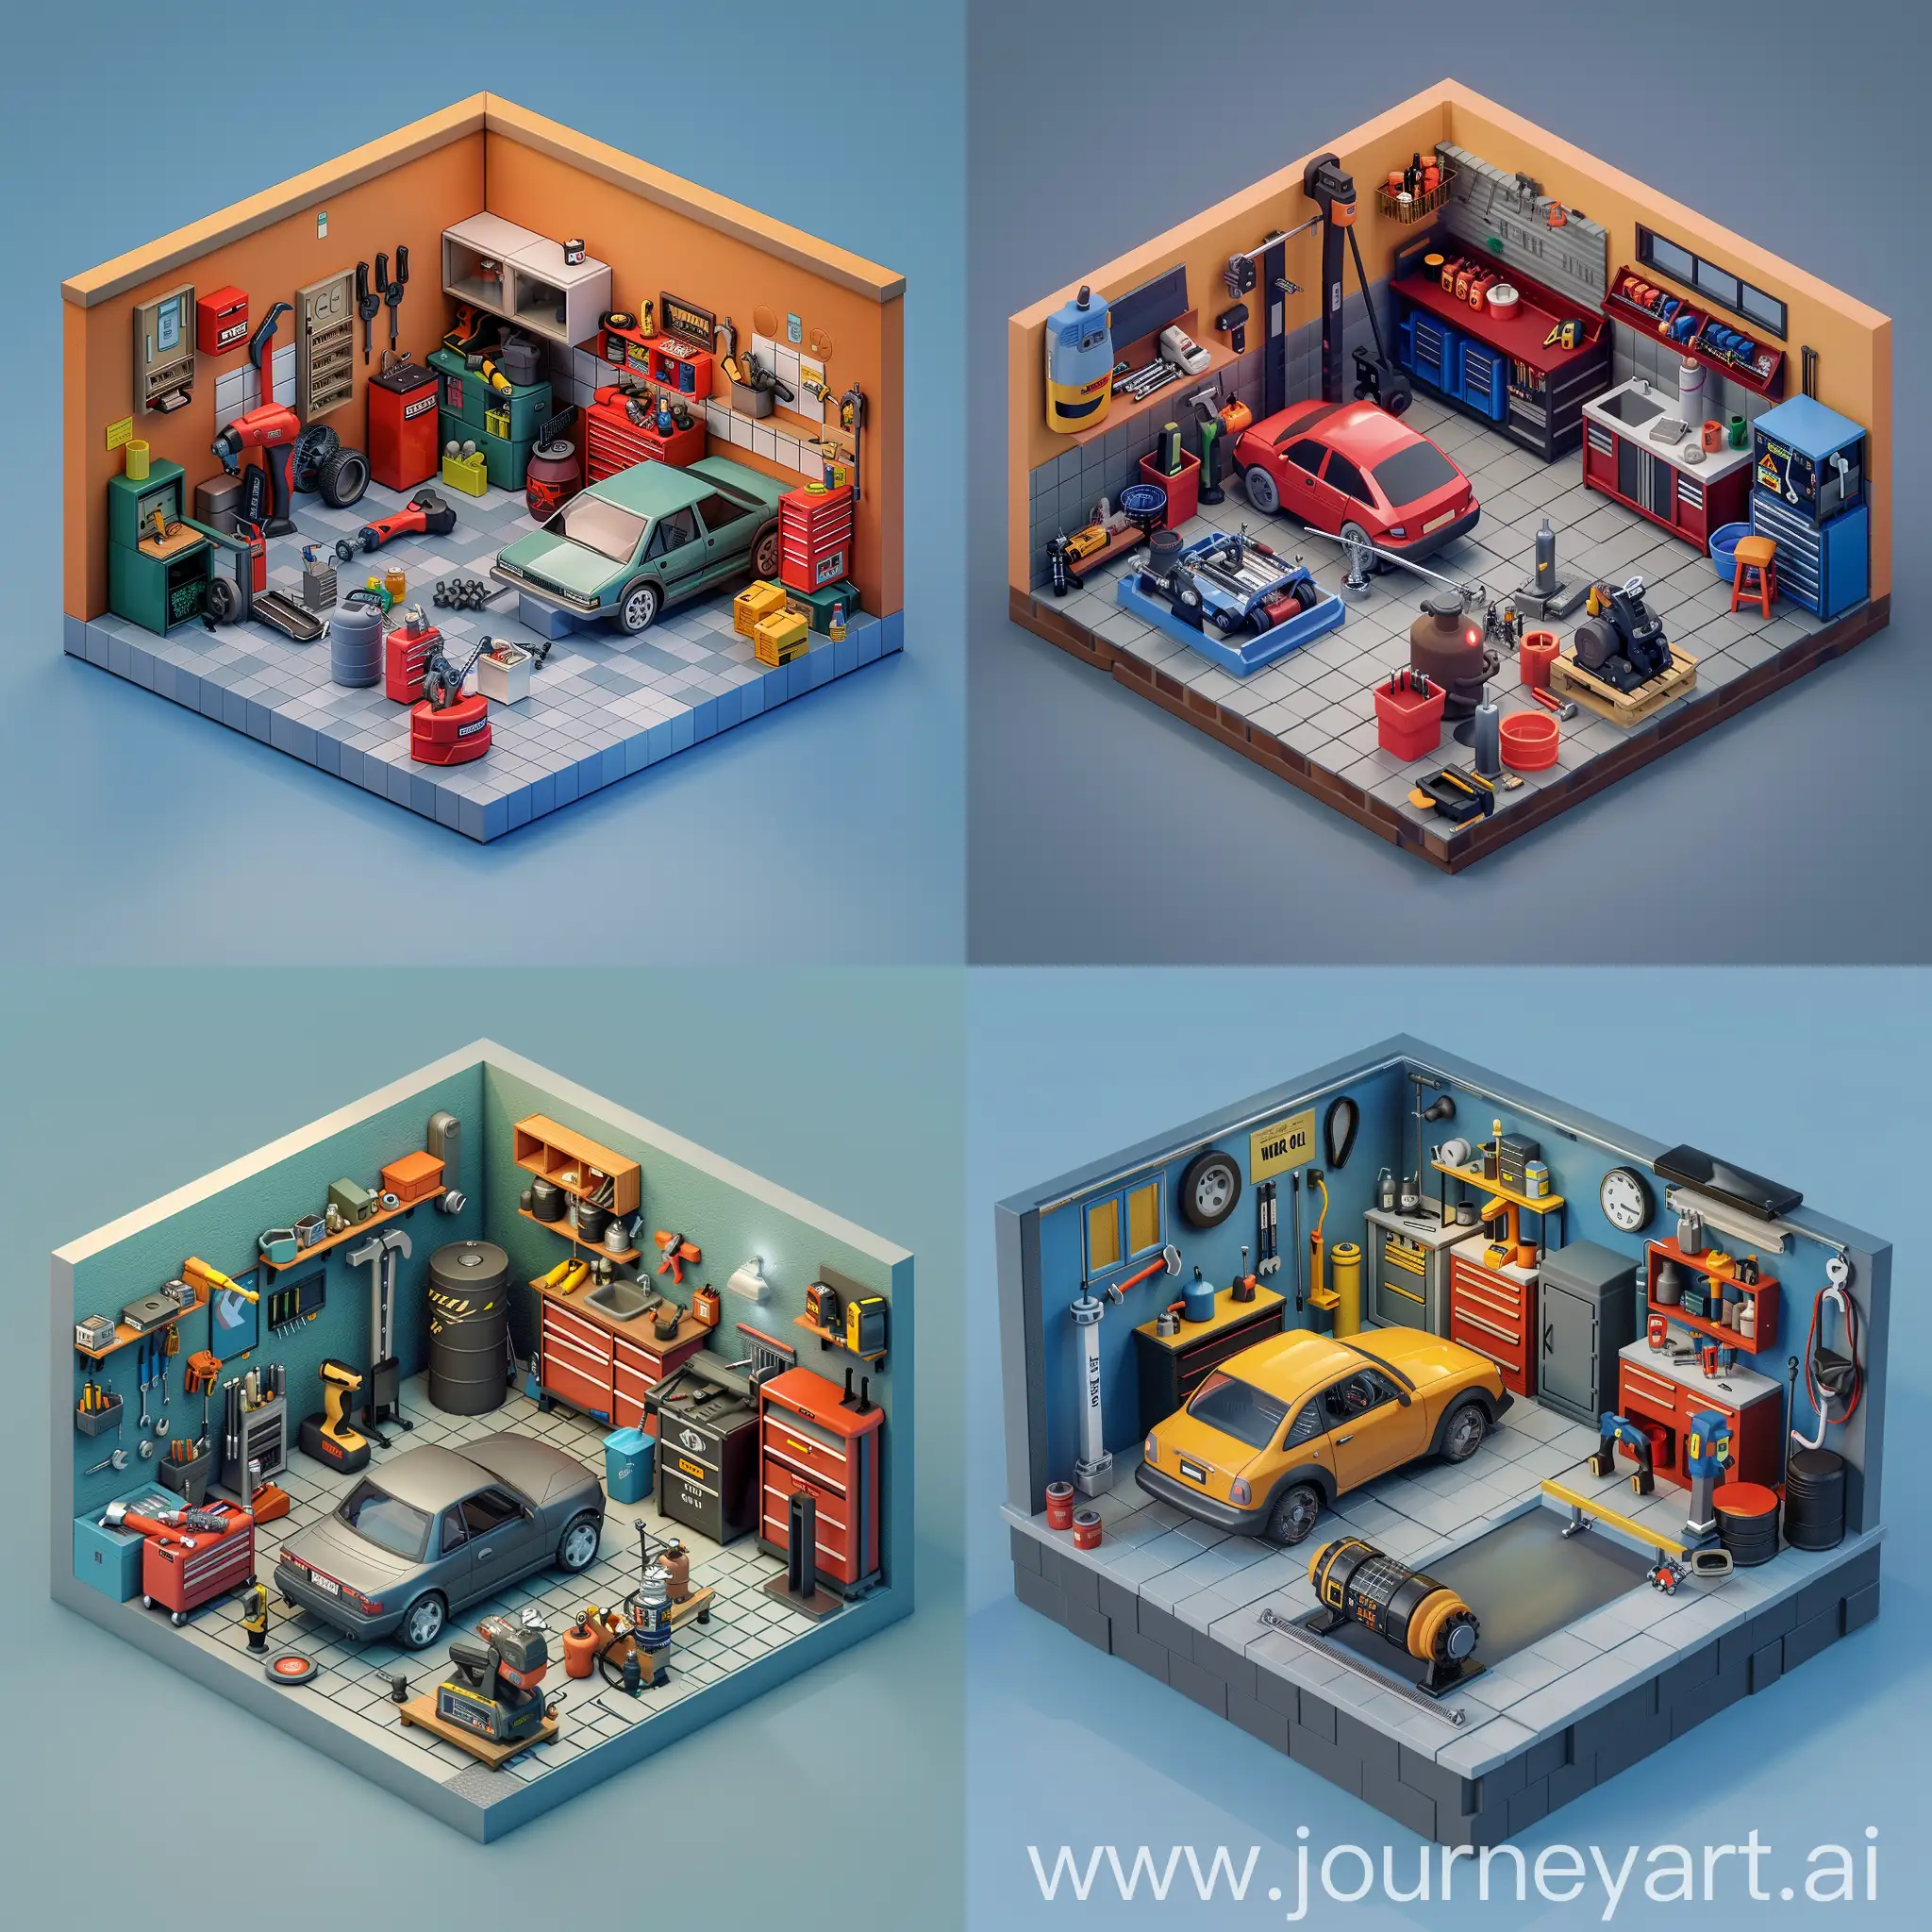 The interior, compact, clutter, tiny, garage with a small car, consist well full equipments should have Floor Jack, Torque Wrench, Air Compressor, Workbench, Tool Box, Oil. 3d isometric game style on blank background. The model should be appropriate with a cube shape, quality in 4k and high detailed